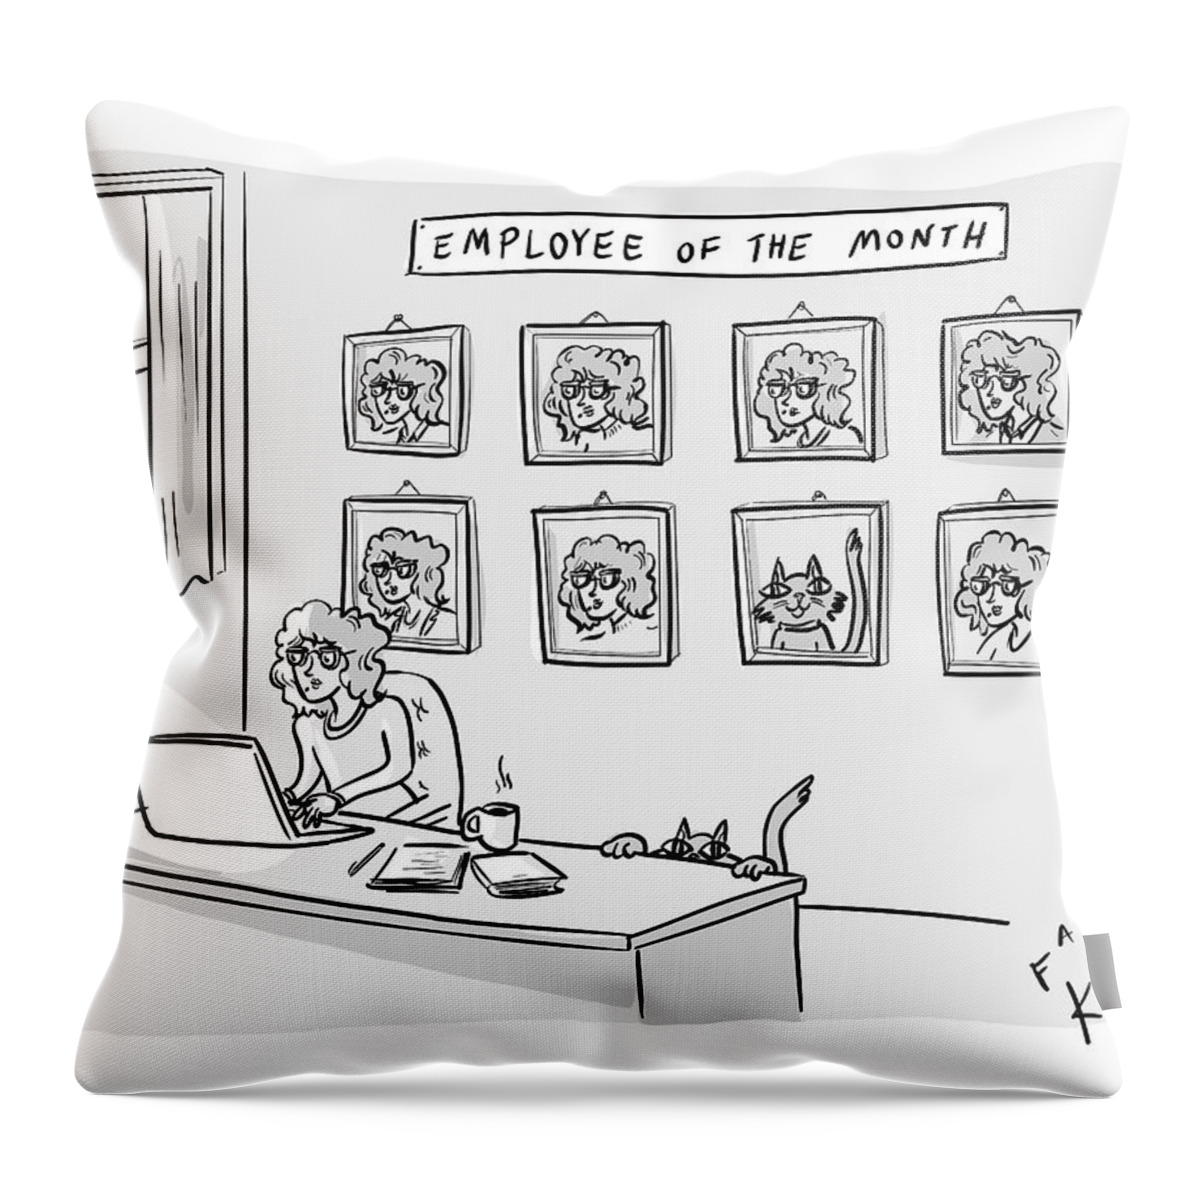 Employee Of The Month Throw Pillow